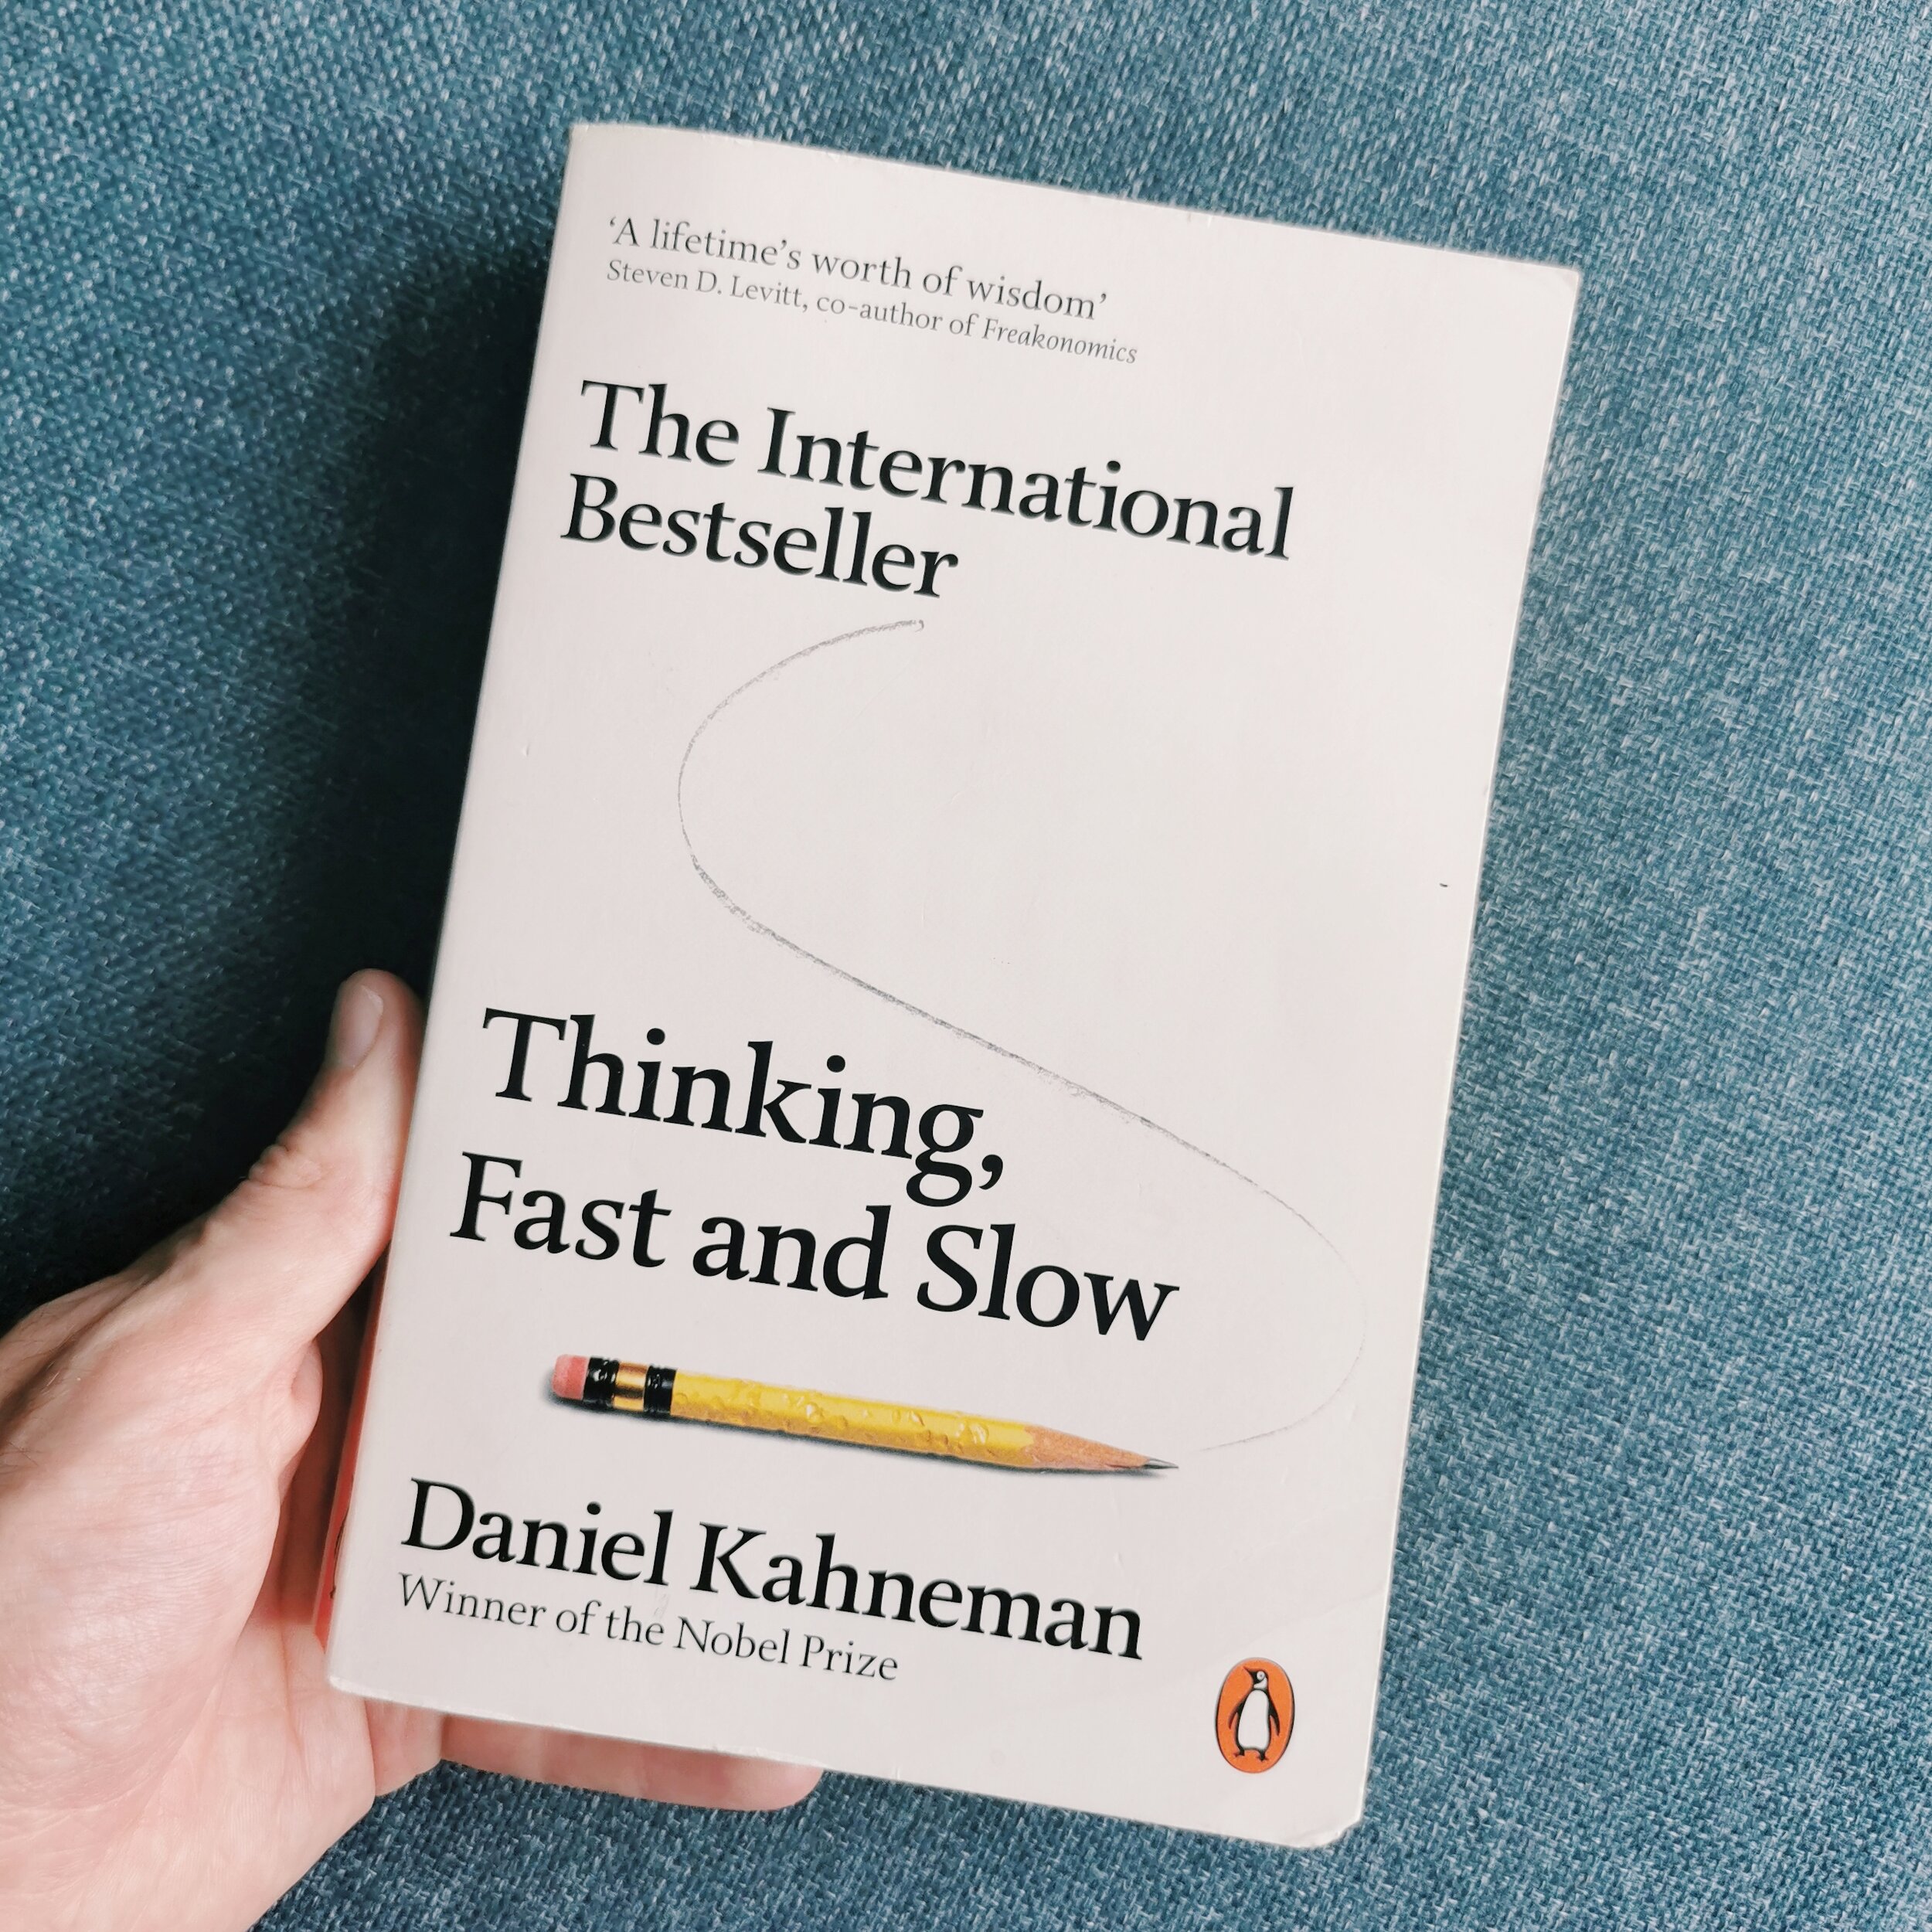 Thinking, Fast and Slow Summary of Daniel Kahneman's Book